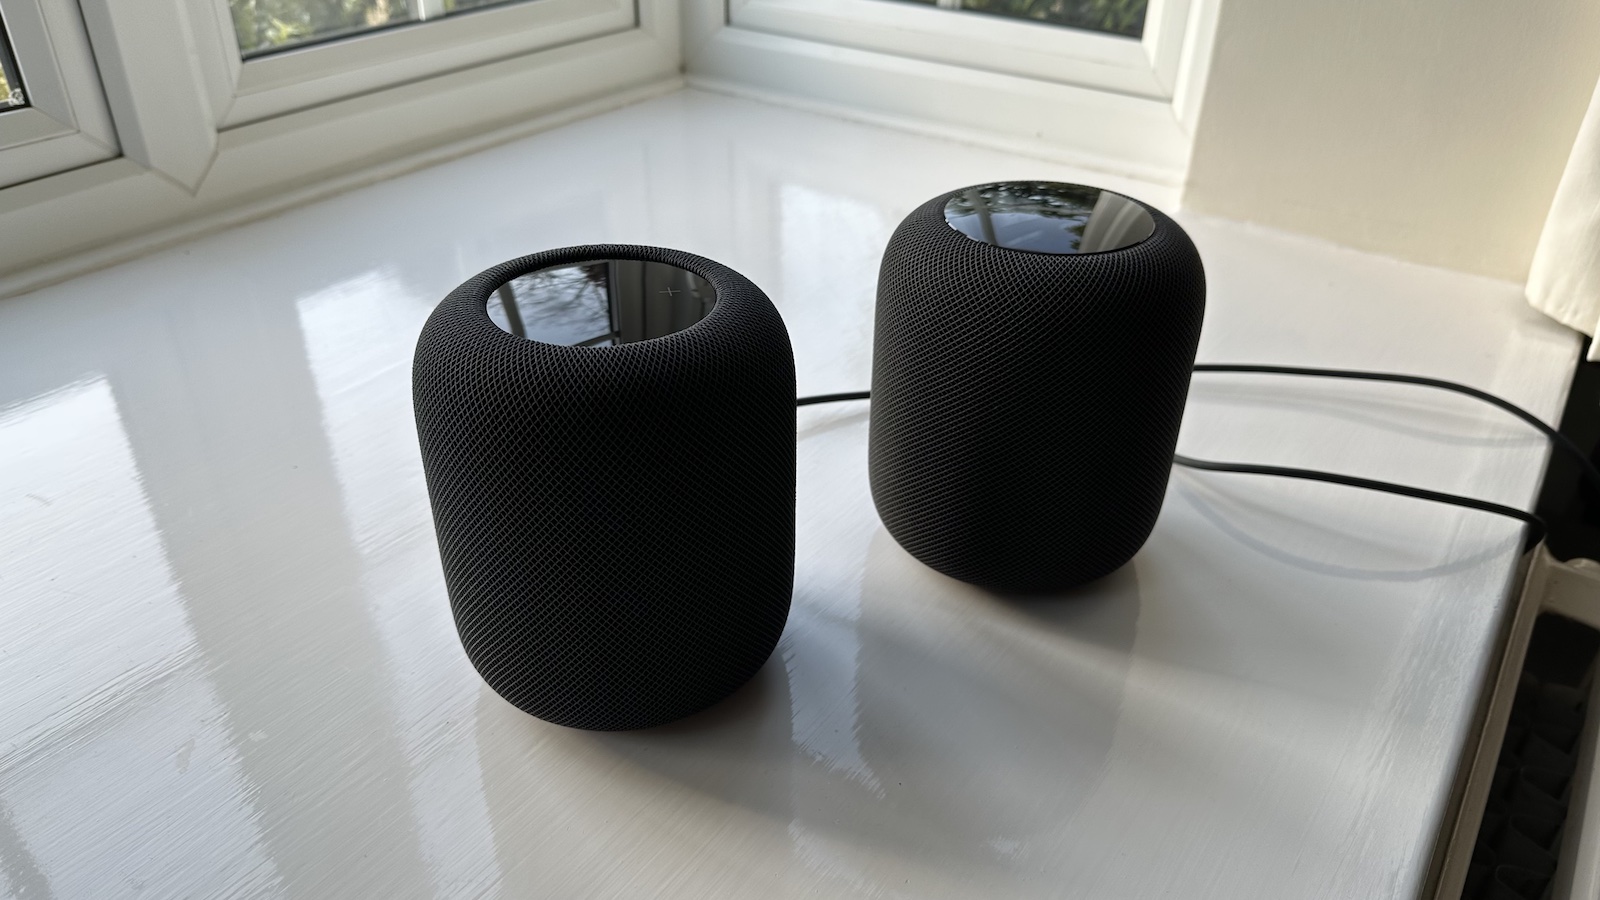 Apple HomePod,  Echo, Google Home and more: We put 7